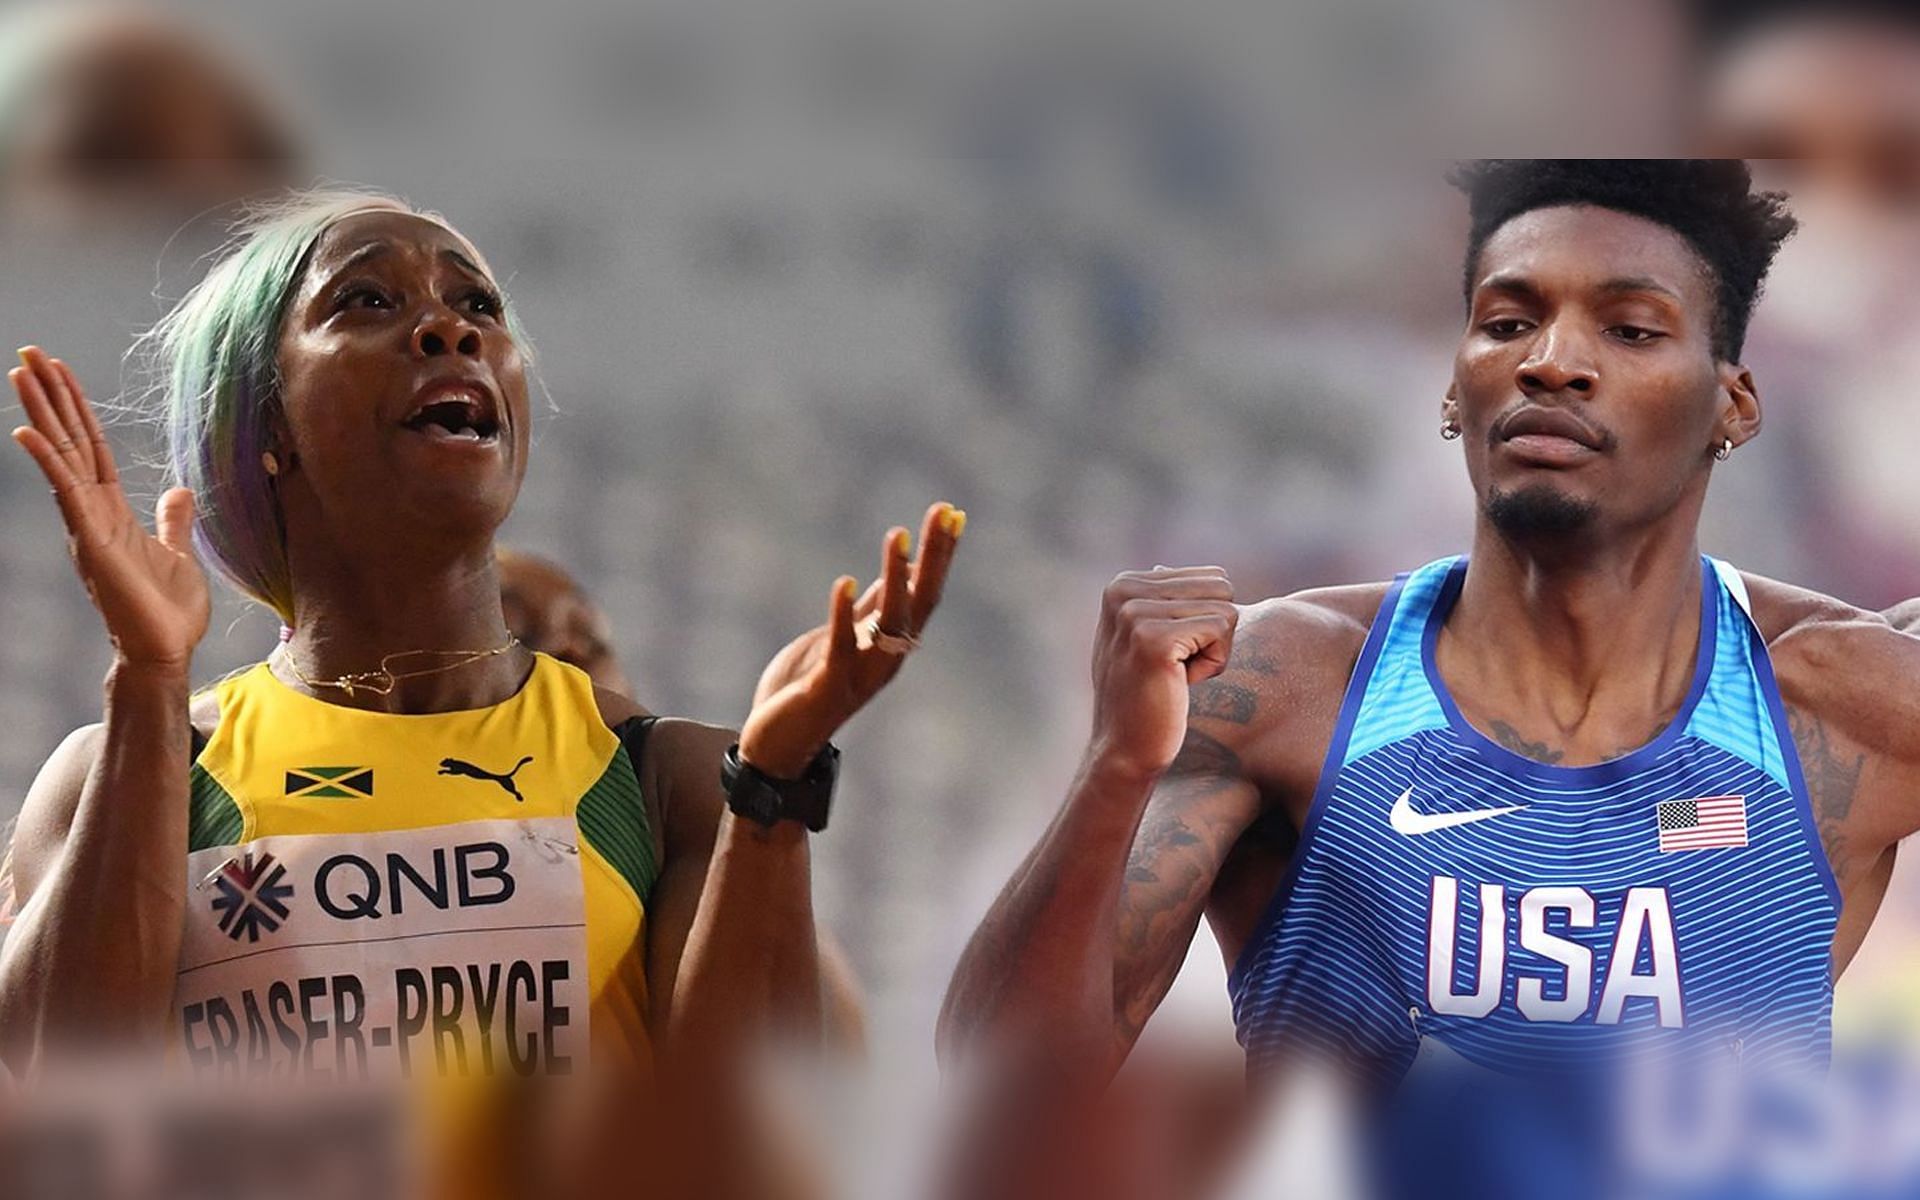 Shelly-Ann Fraser-Pryce and Fred Kerley are both taking part in the 100-meter dash